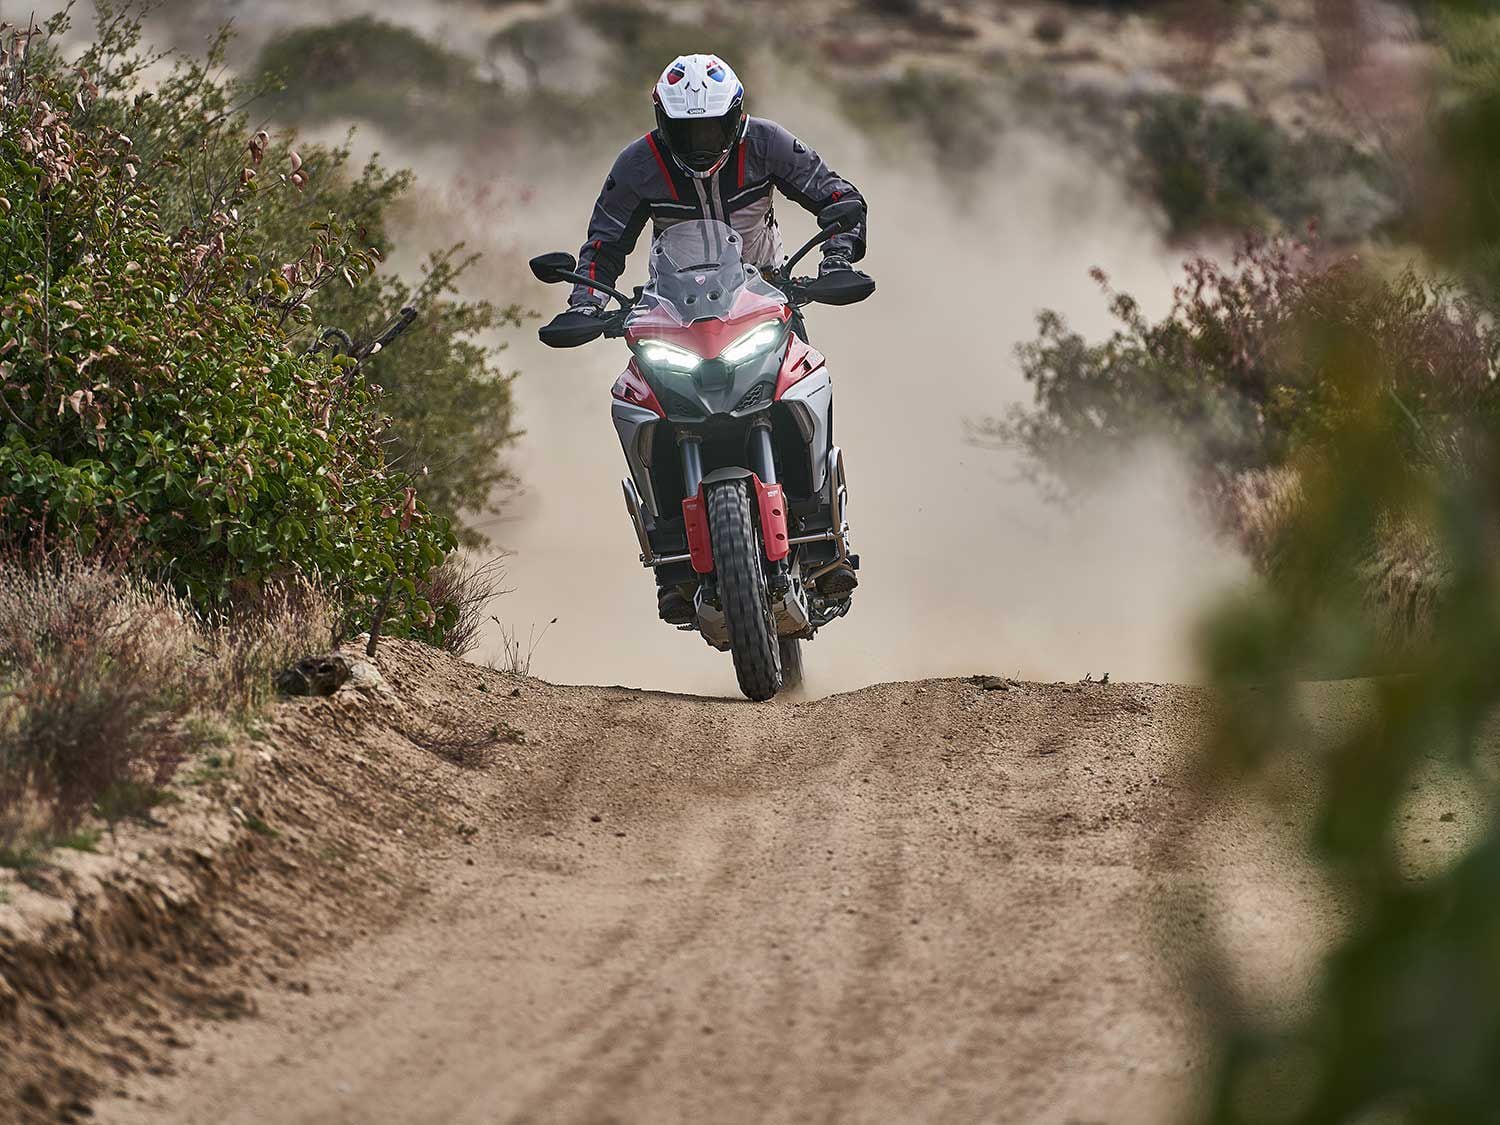 The Multistrada V4 benefits from added ground clearance and a larger diameter 19-inch front wheel to boost capability off-road. It is certainly more practical than the previous iterations, but needs a 21/18-inch wheel combo for it to be truly competitive in the dirt.